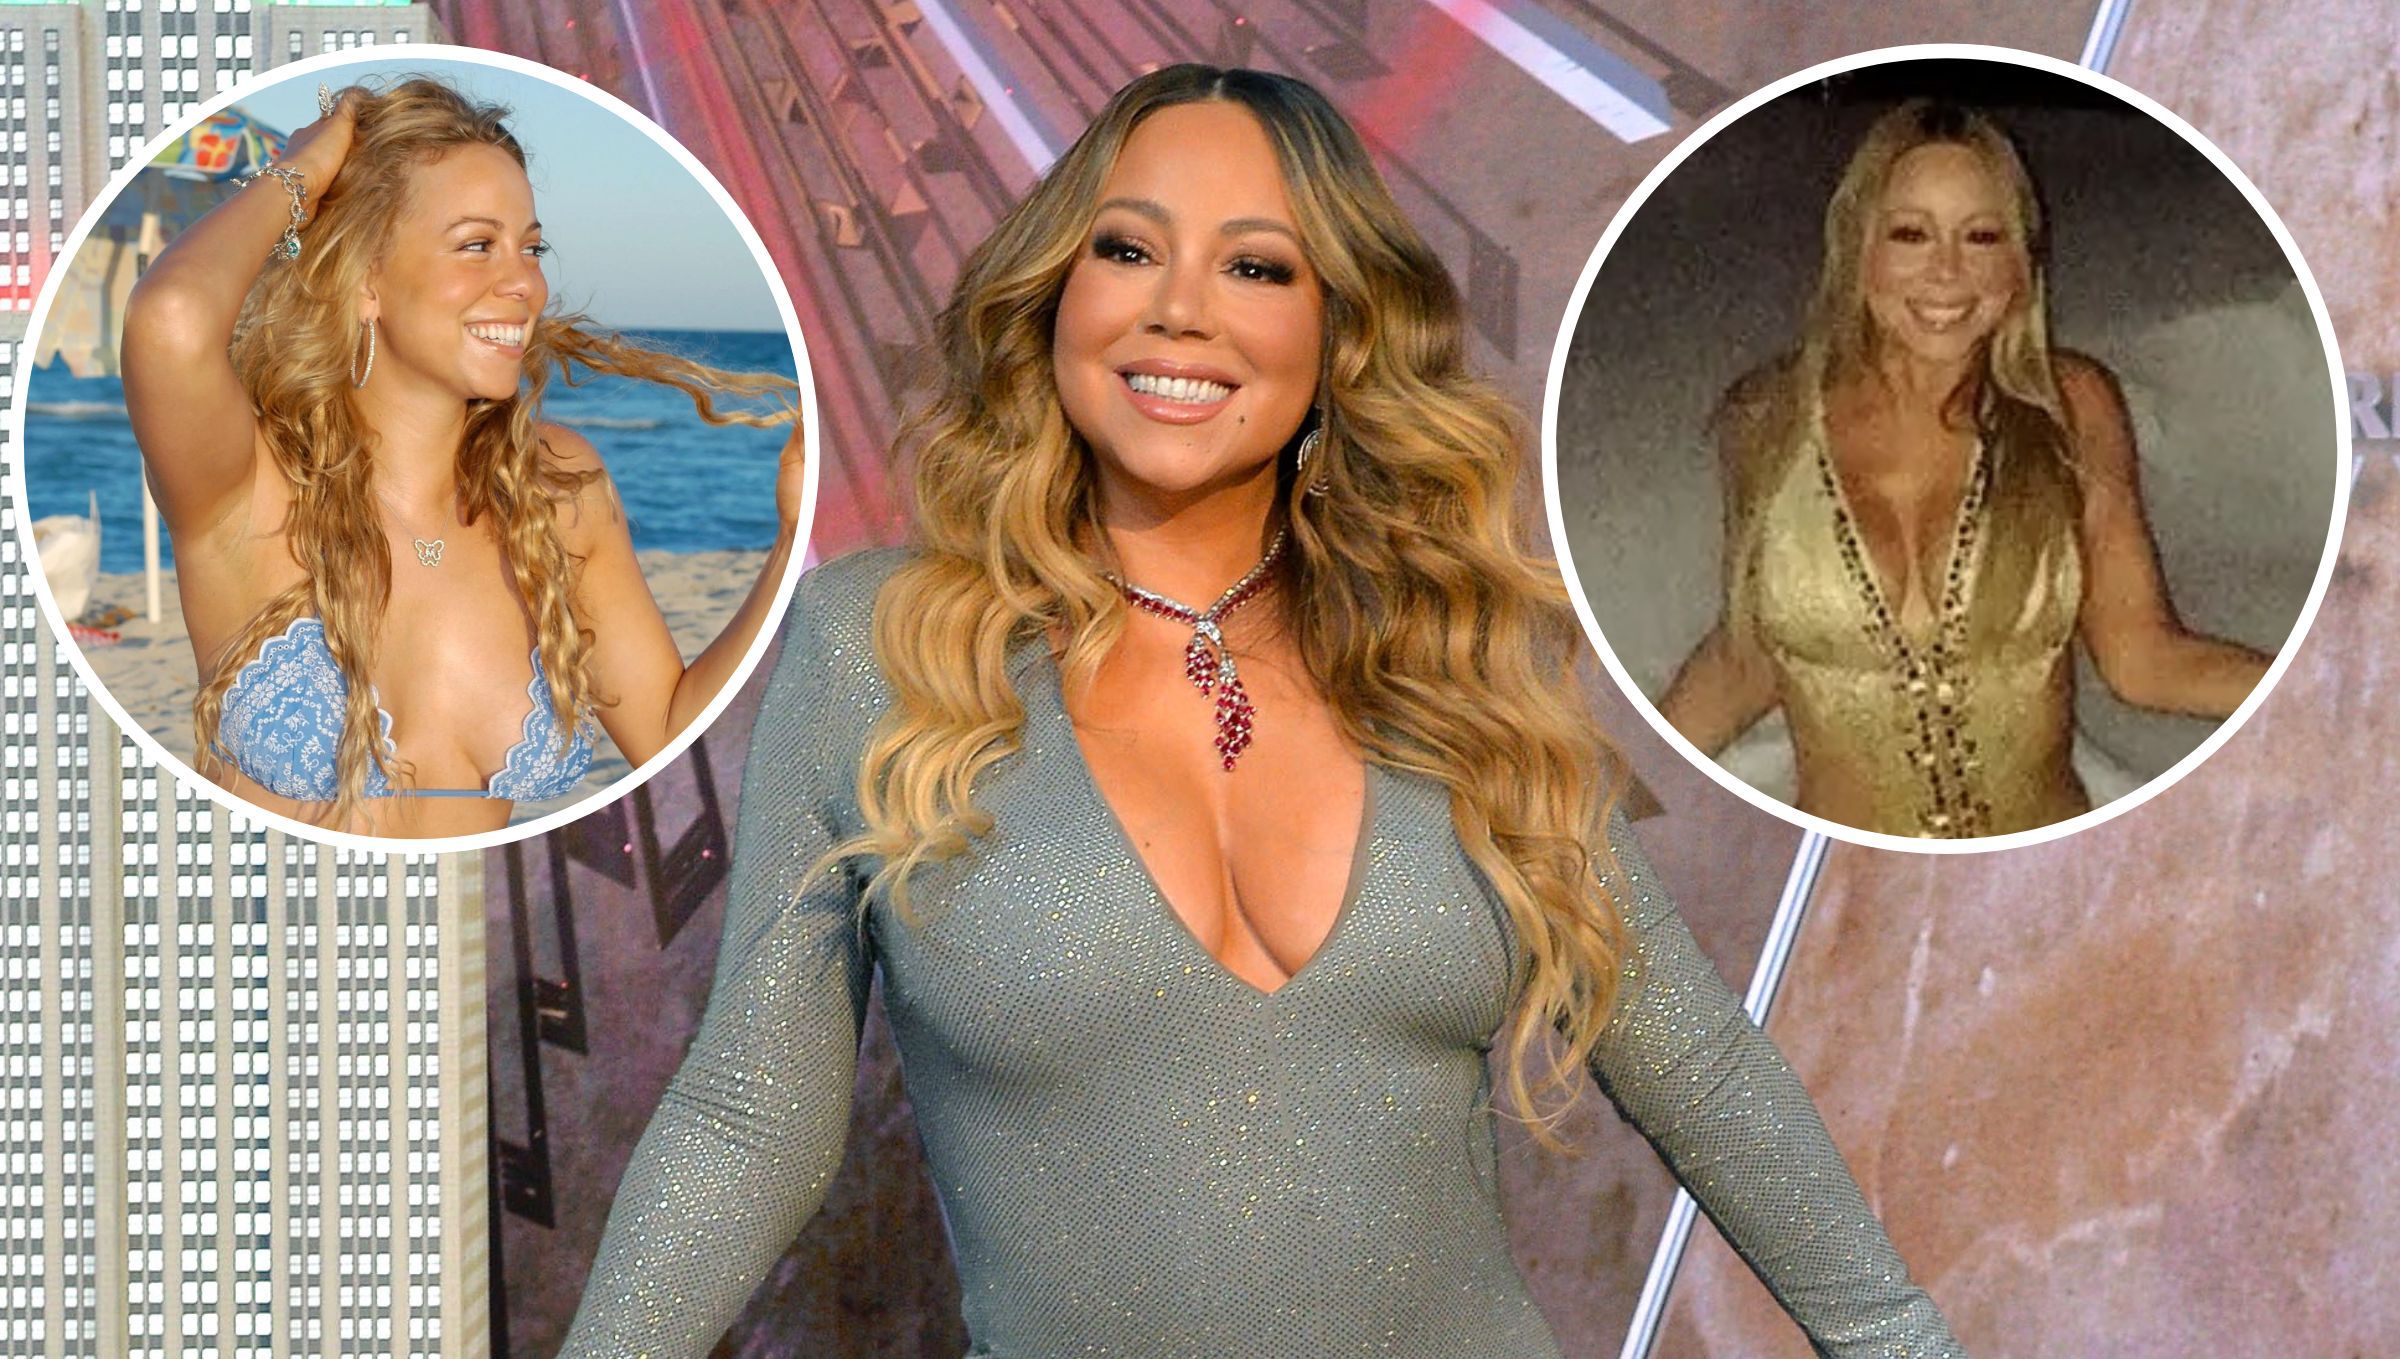 cory kerr recommends mariah carey tits nude pic